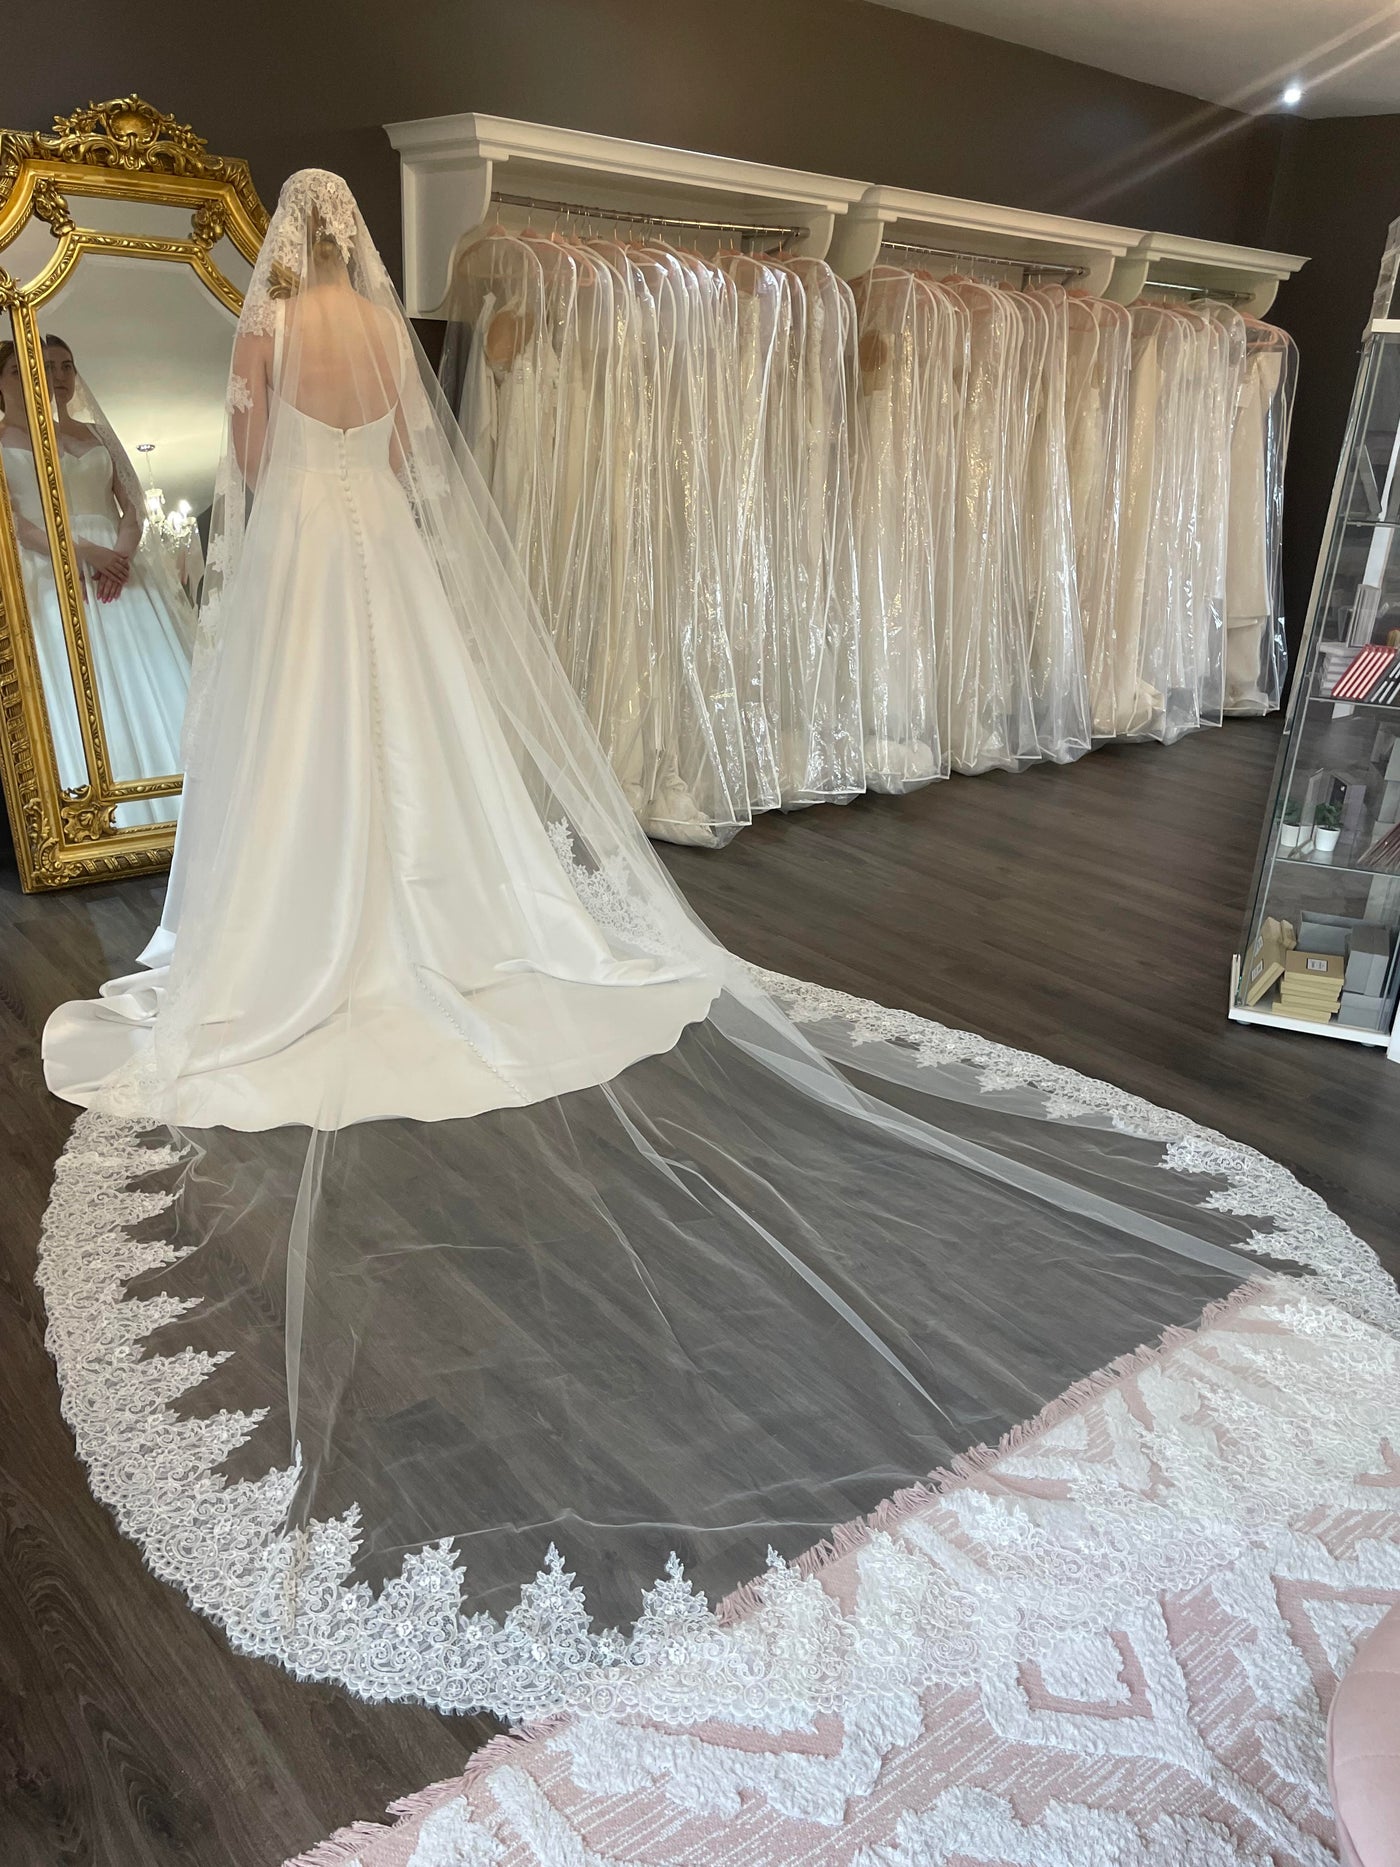 Royal Traditional Lace Veil